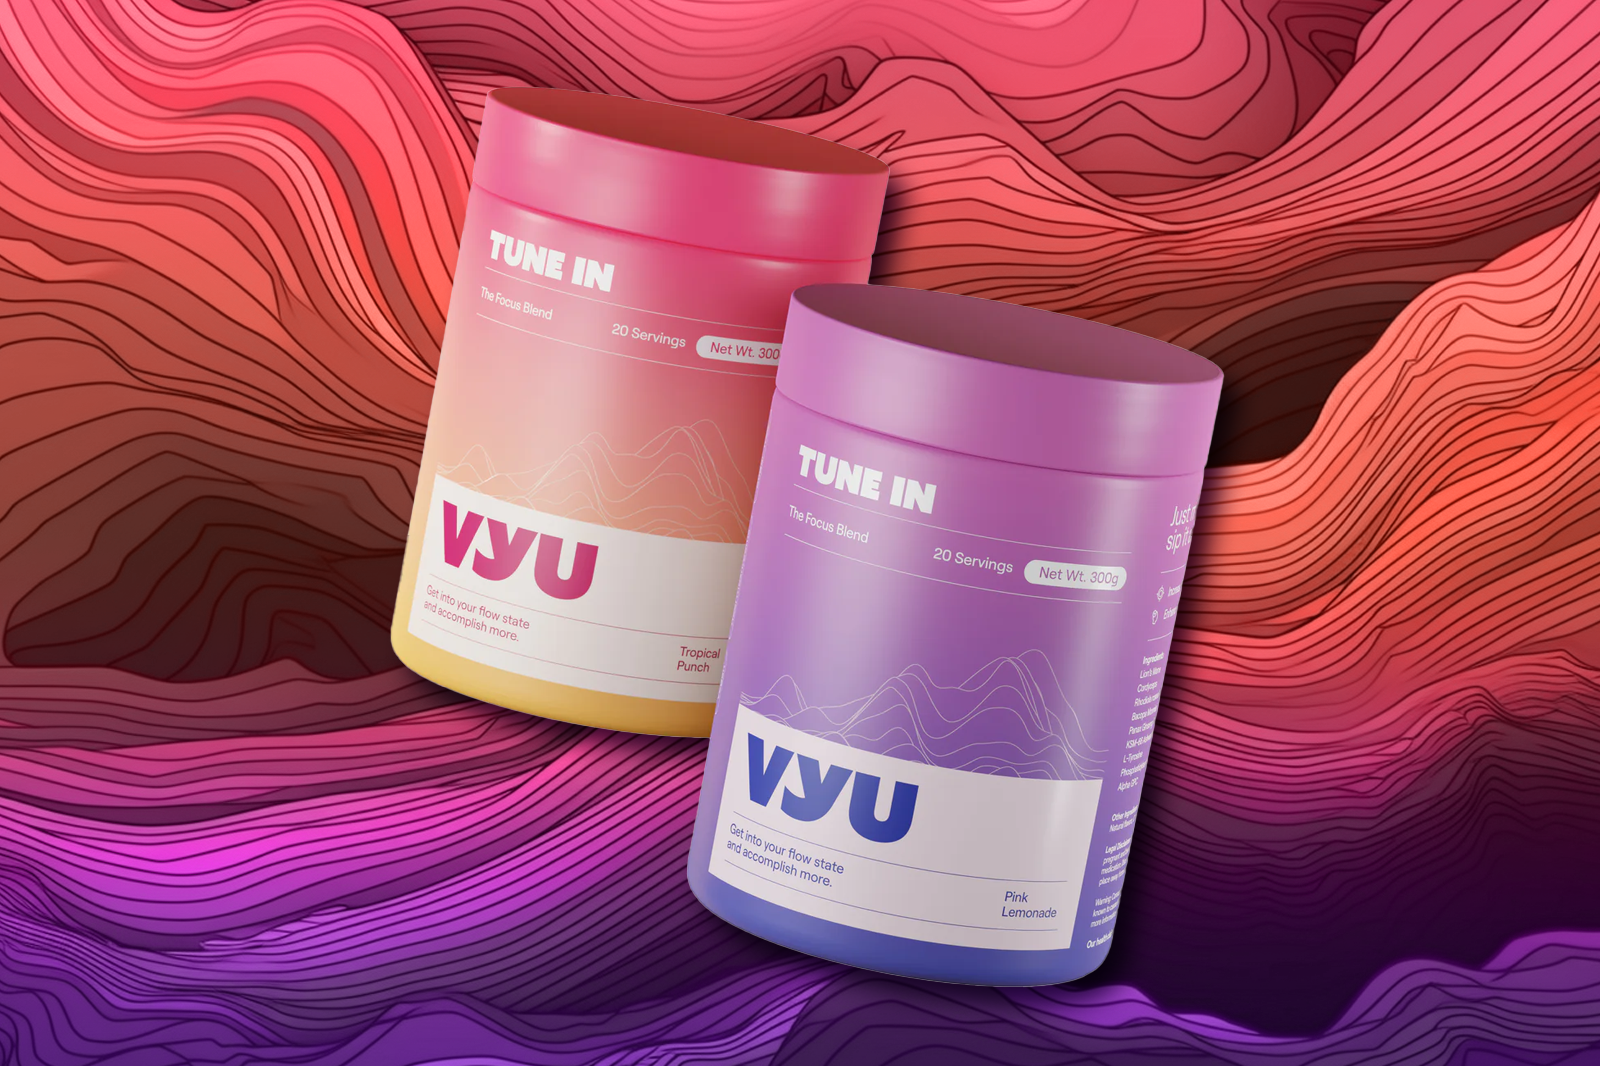 Two VYU TUNE IN containers in Pink Lemonade and Tropical Punch flavors placed against a multi-colored background